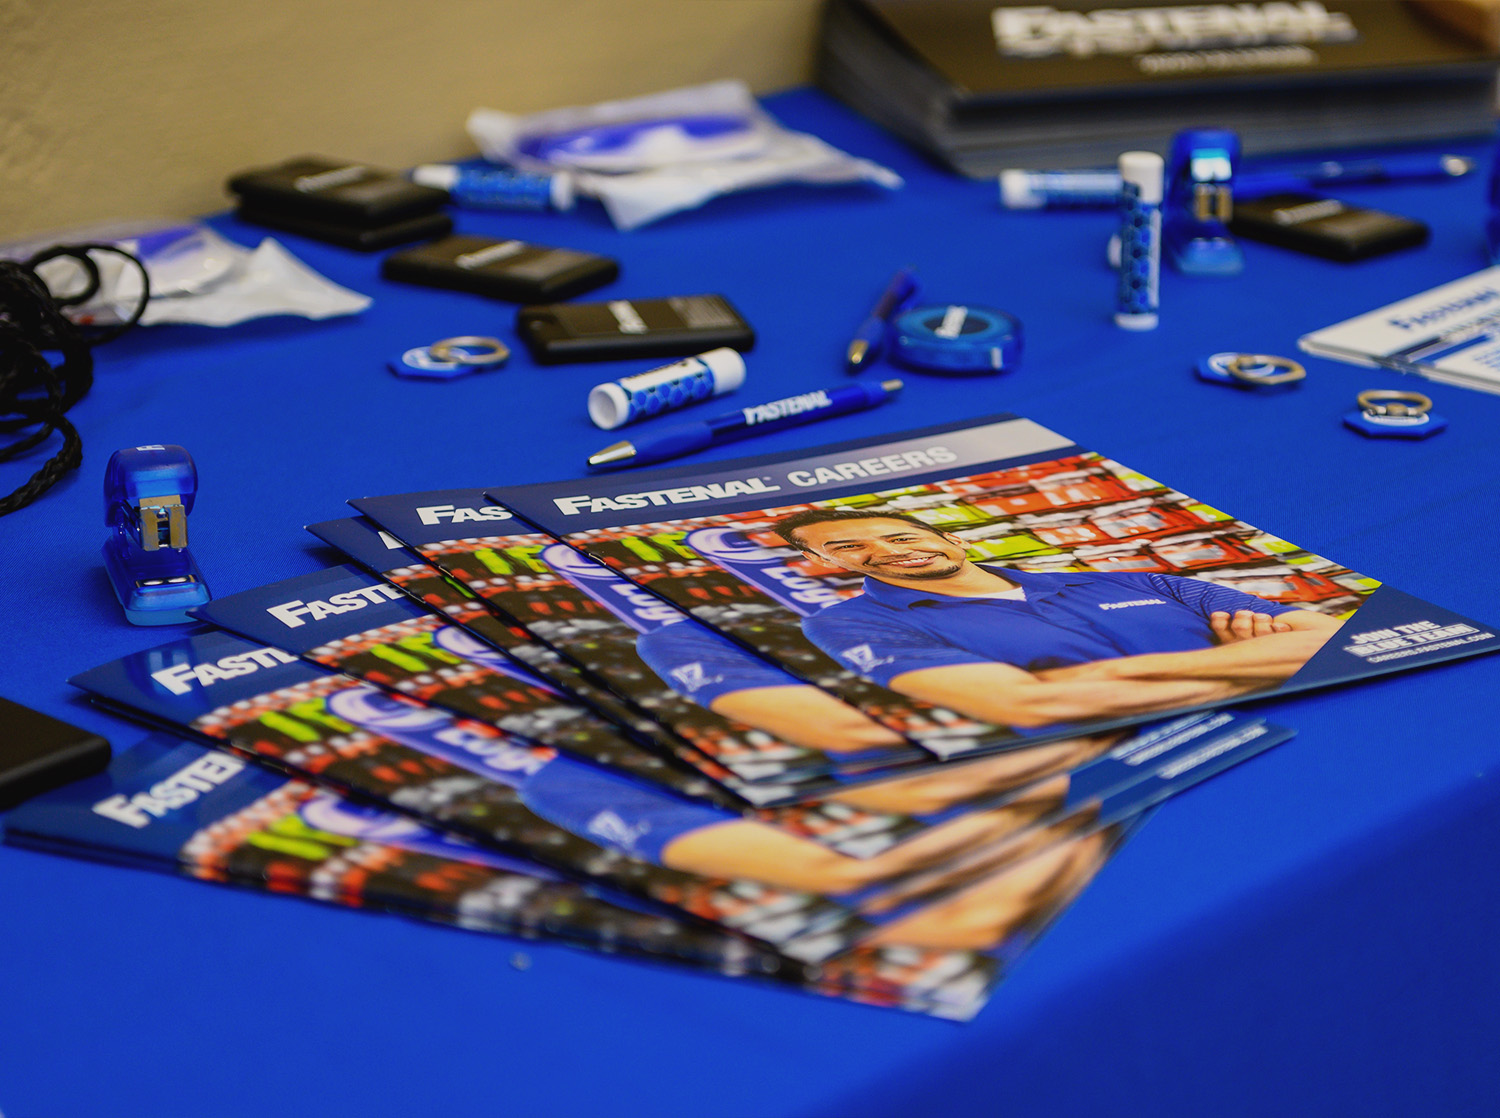 Fastenal booth at the career fair